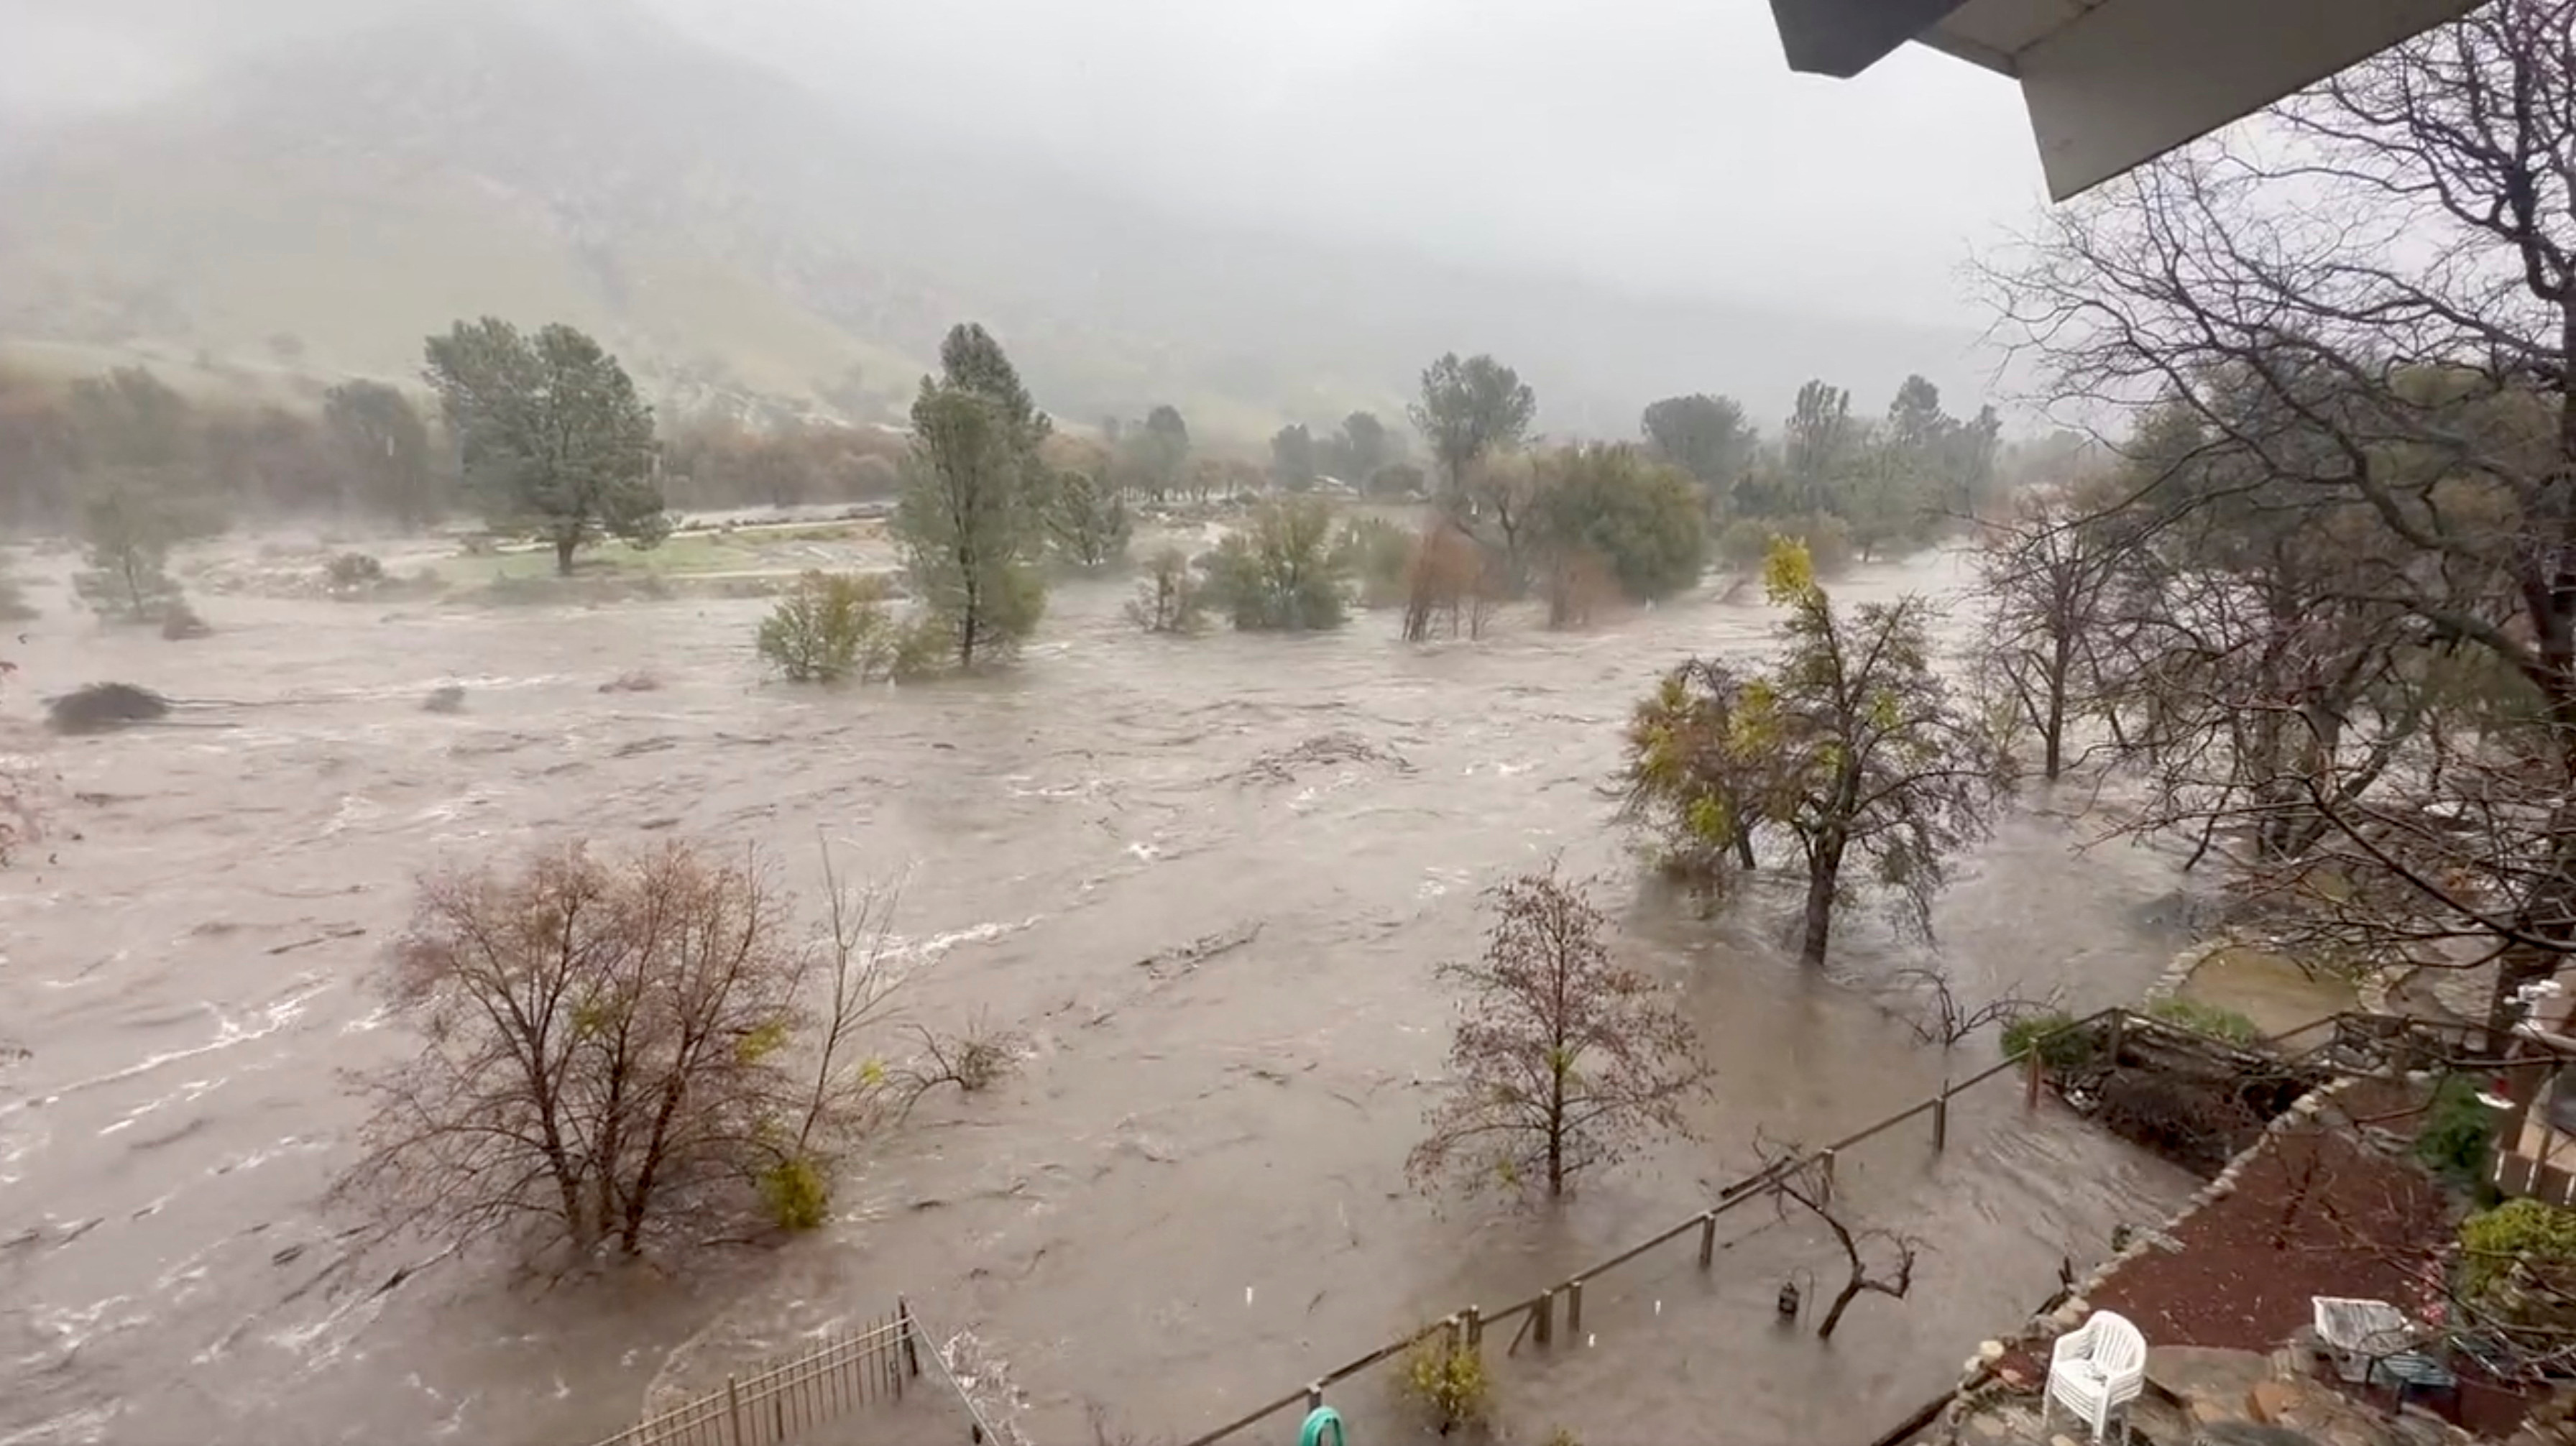 A view shows the overflowing Kern River, as seen from the backyard of a person's house, in Kernville